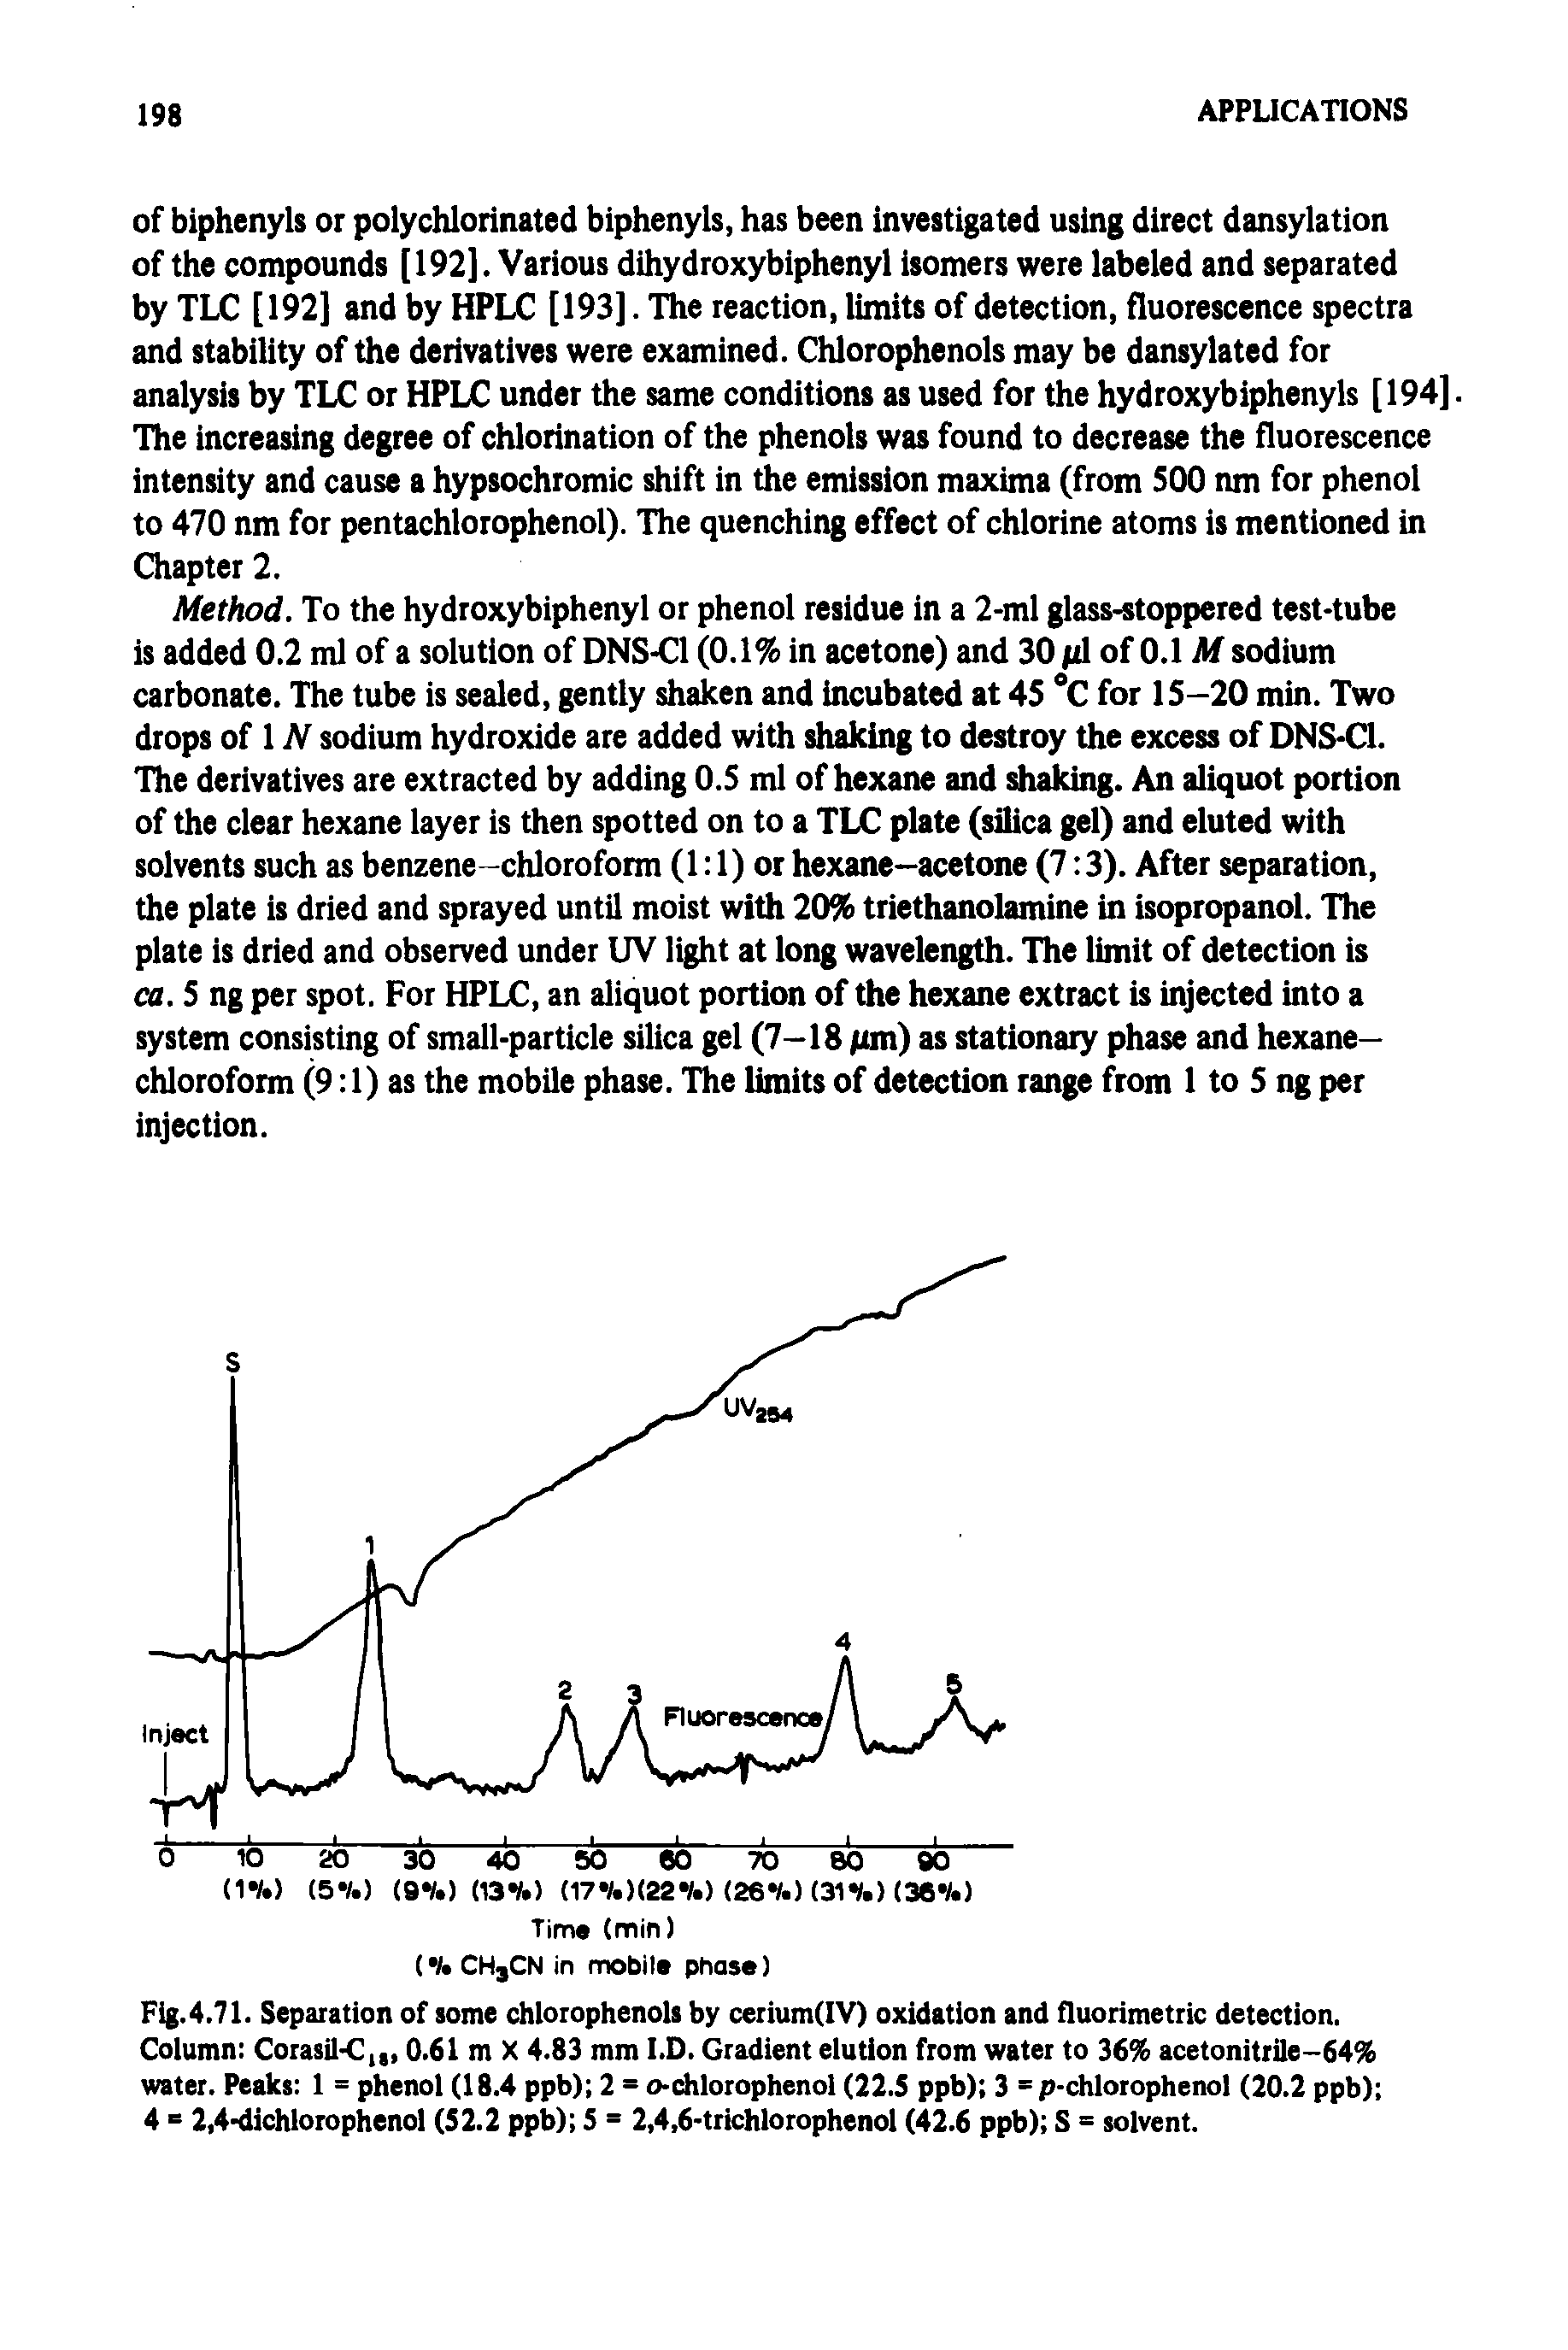 Fig.4.71. Separation of some chlorophenols by cerium(IV) oxidation and fluorimetric detection. Column Corasil-C, 0.61 m X 4.83 mm I.D. Gradient elution from water to 36% acetonitrile-64% water. Peaks 1 = phenol (18.4 ppb) 2 = o-chlorophenol (22.S ppb) 3 = p-chlorophenol (20.2 ppb) 4 2,4-dichlorophenol (52.2 ppb) 5 = 2,4,6-trichlorophenol (42.6 ppb) S = solvent.